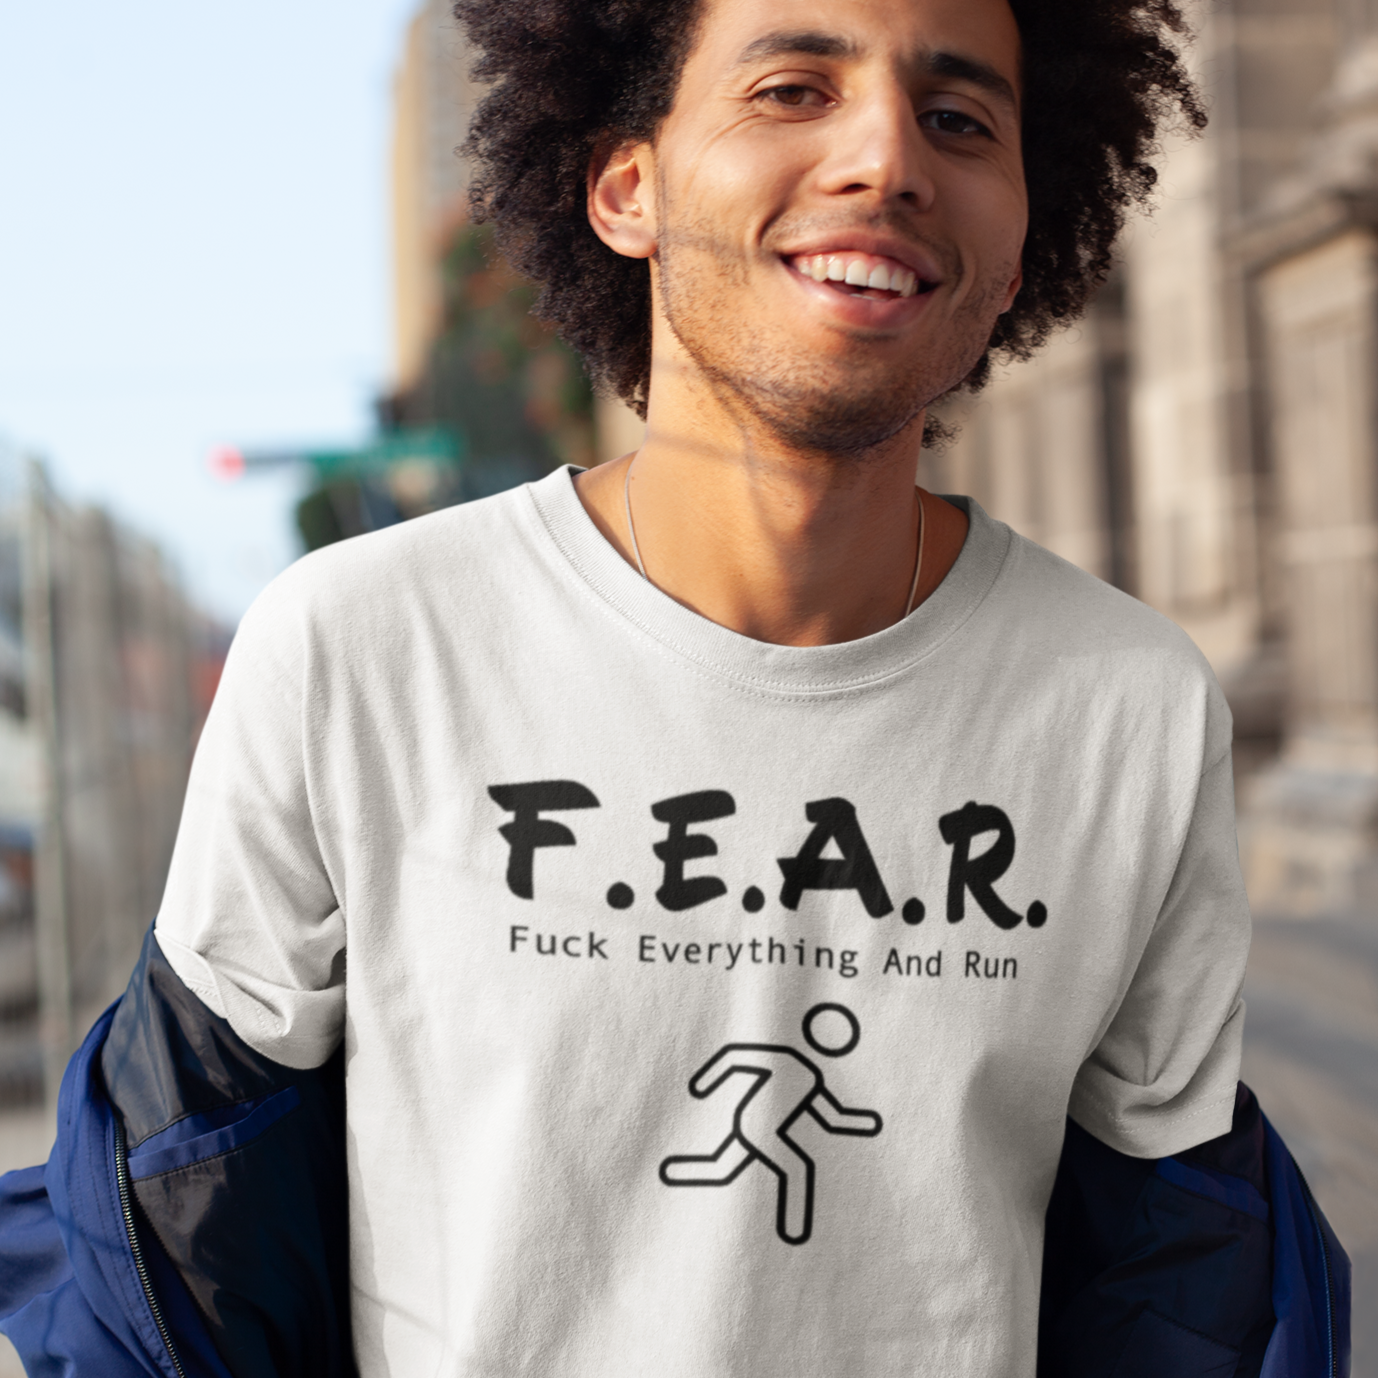 f-e-a-r-t-shirt-mockup-of-a-happy-man-with-an-afro-out-on-the-street-